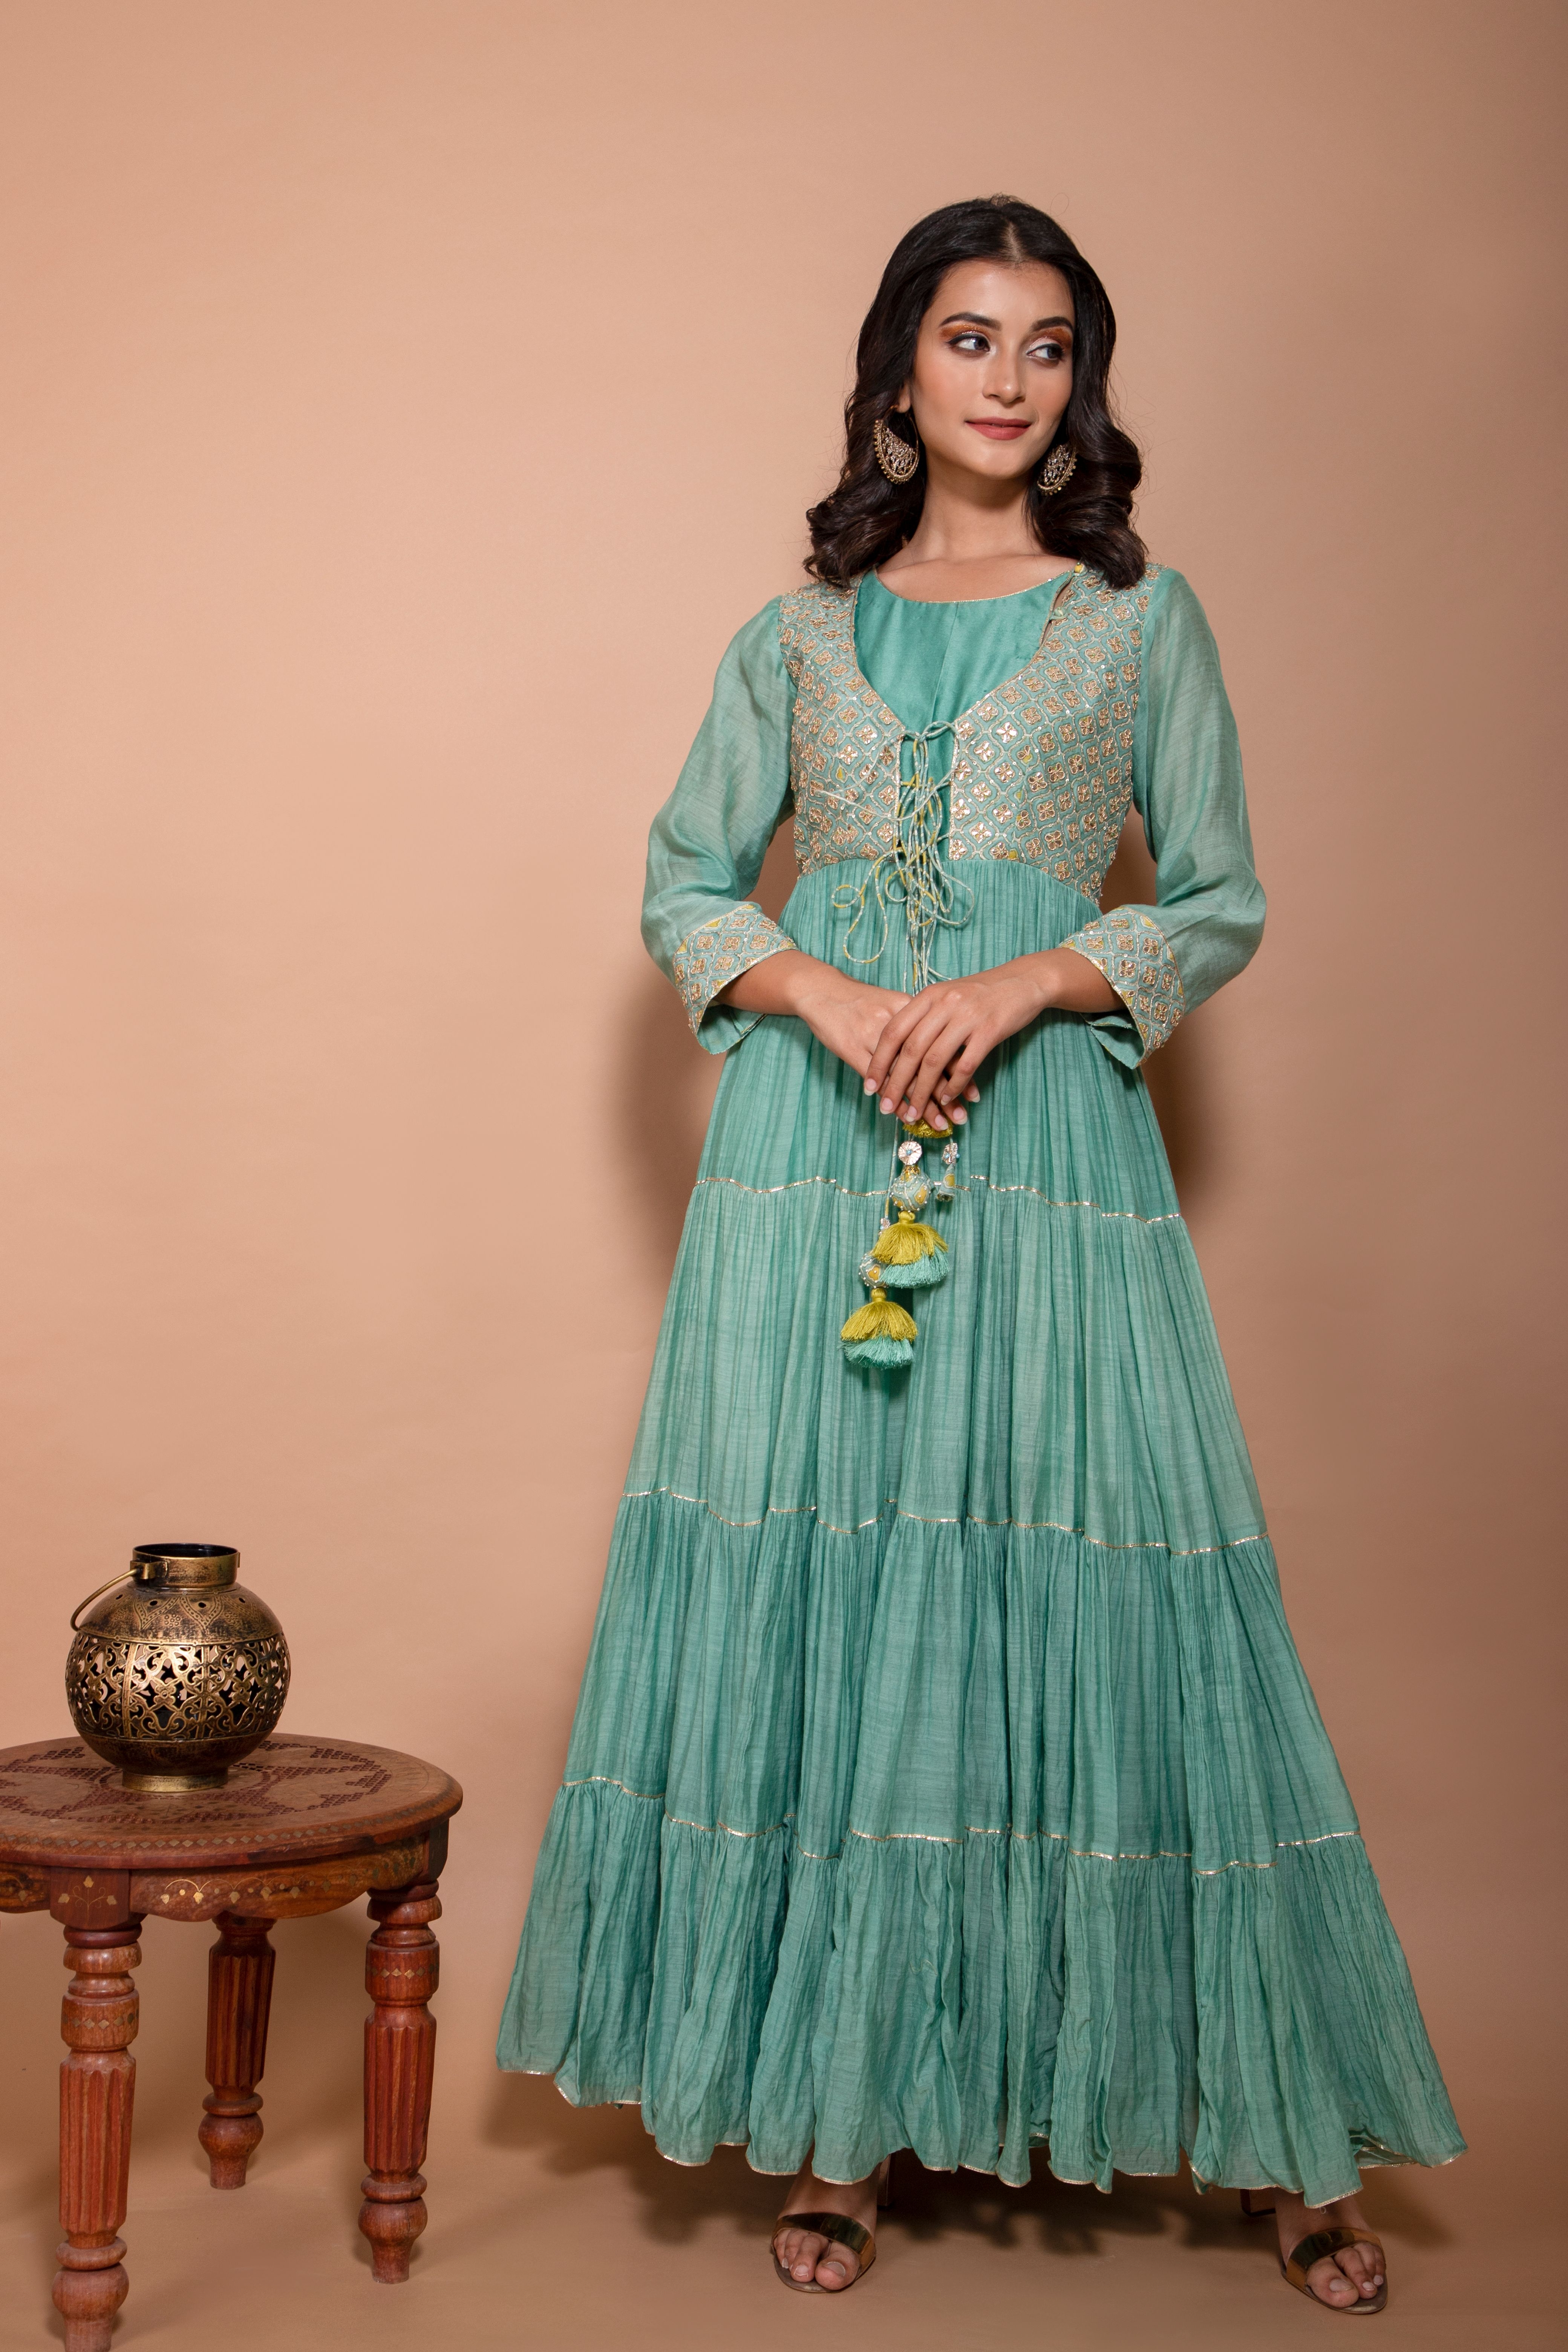 Tiered chanderi dress with gota work on the yoke and tassels in the front with shaded dupatta